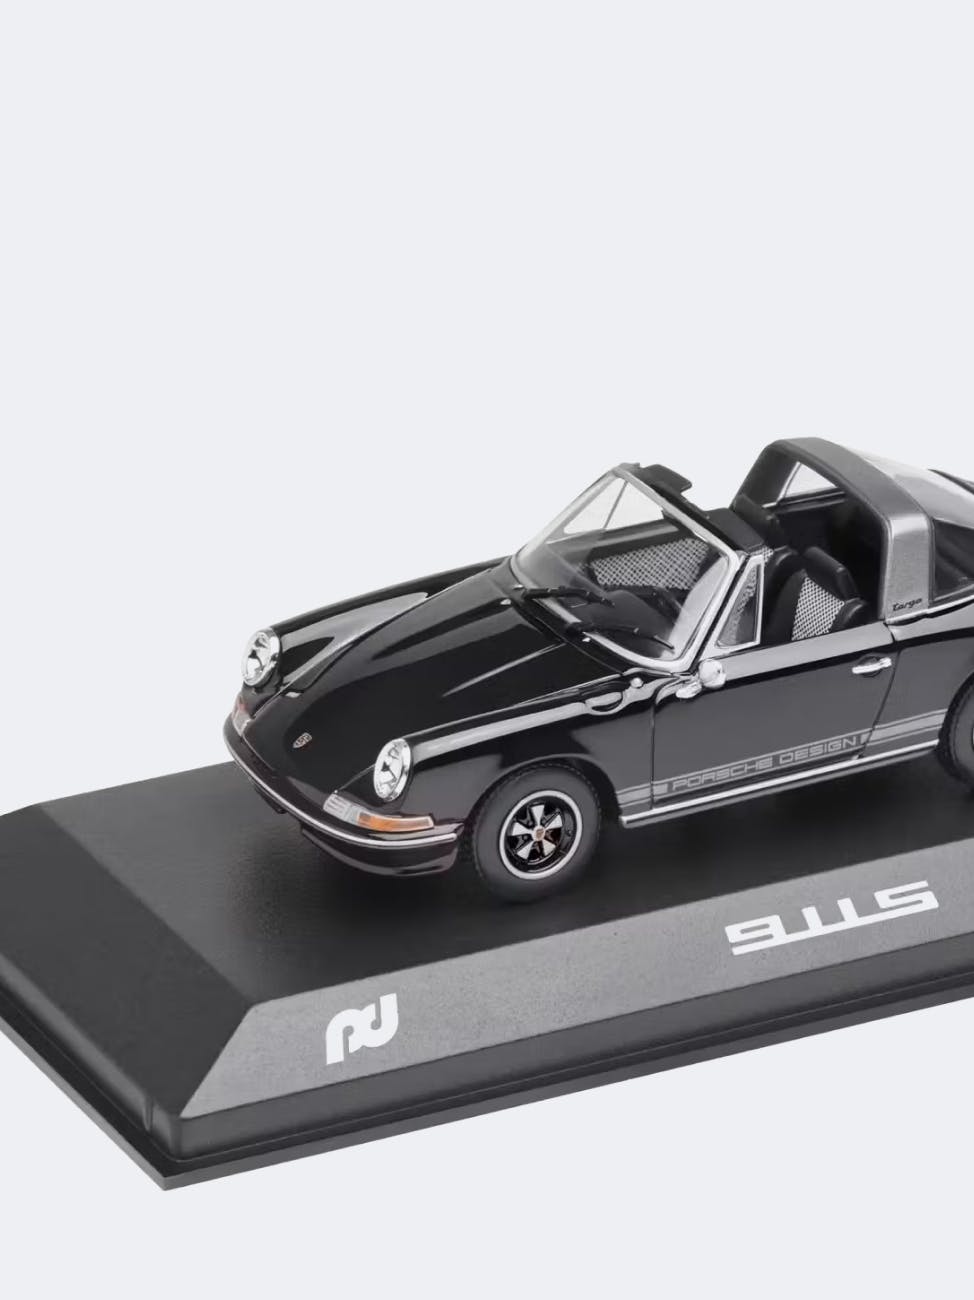 You can see a black model car from Porsche.